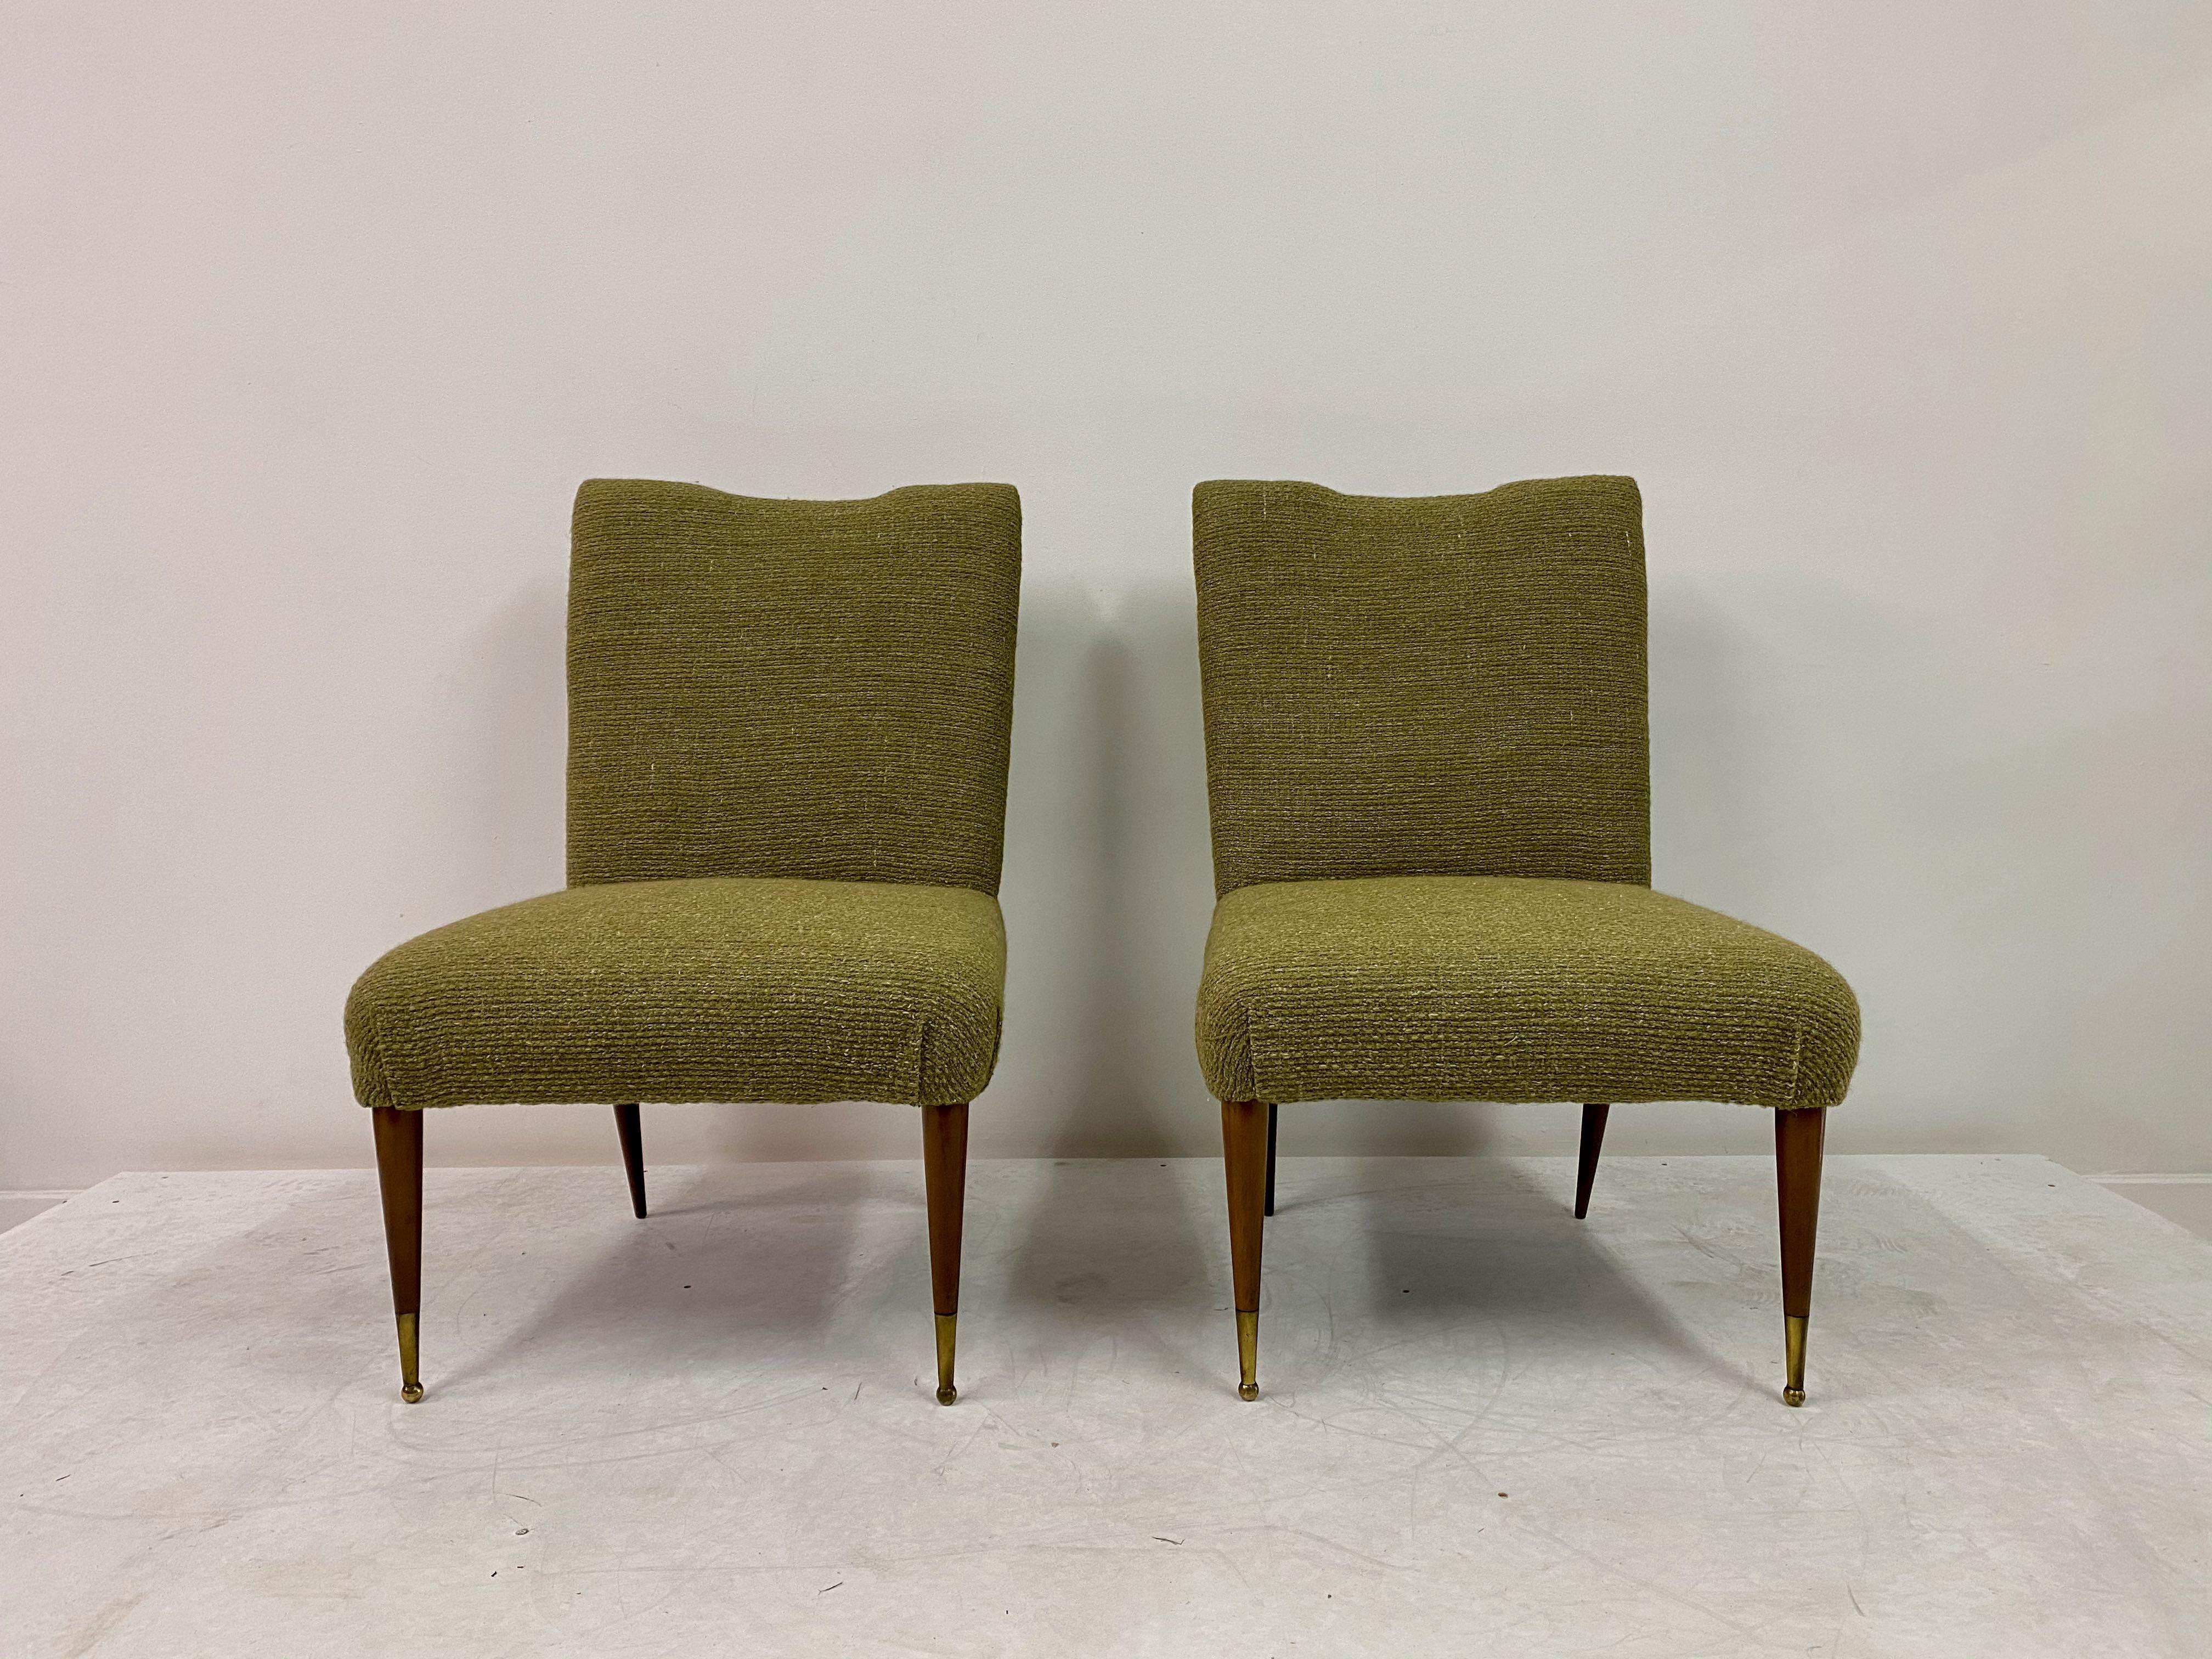 Pair of chairs

New upholstery in designs of the time wool linen blend fabric

Walnut frame

Brass ball feet,

1950s, Italian.